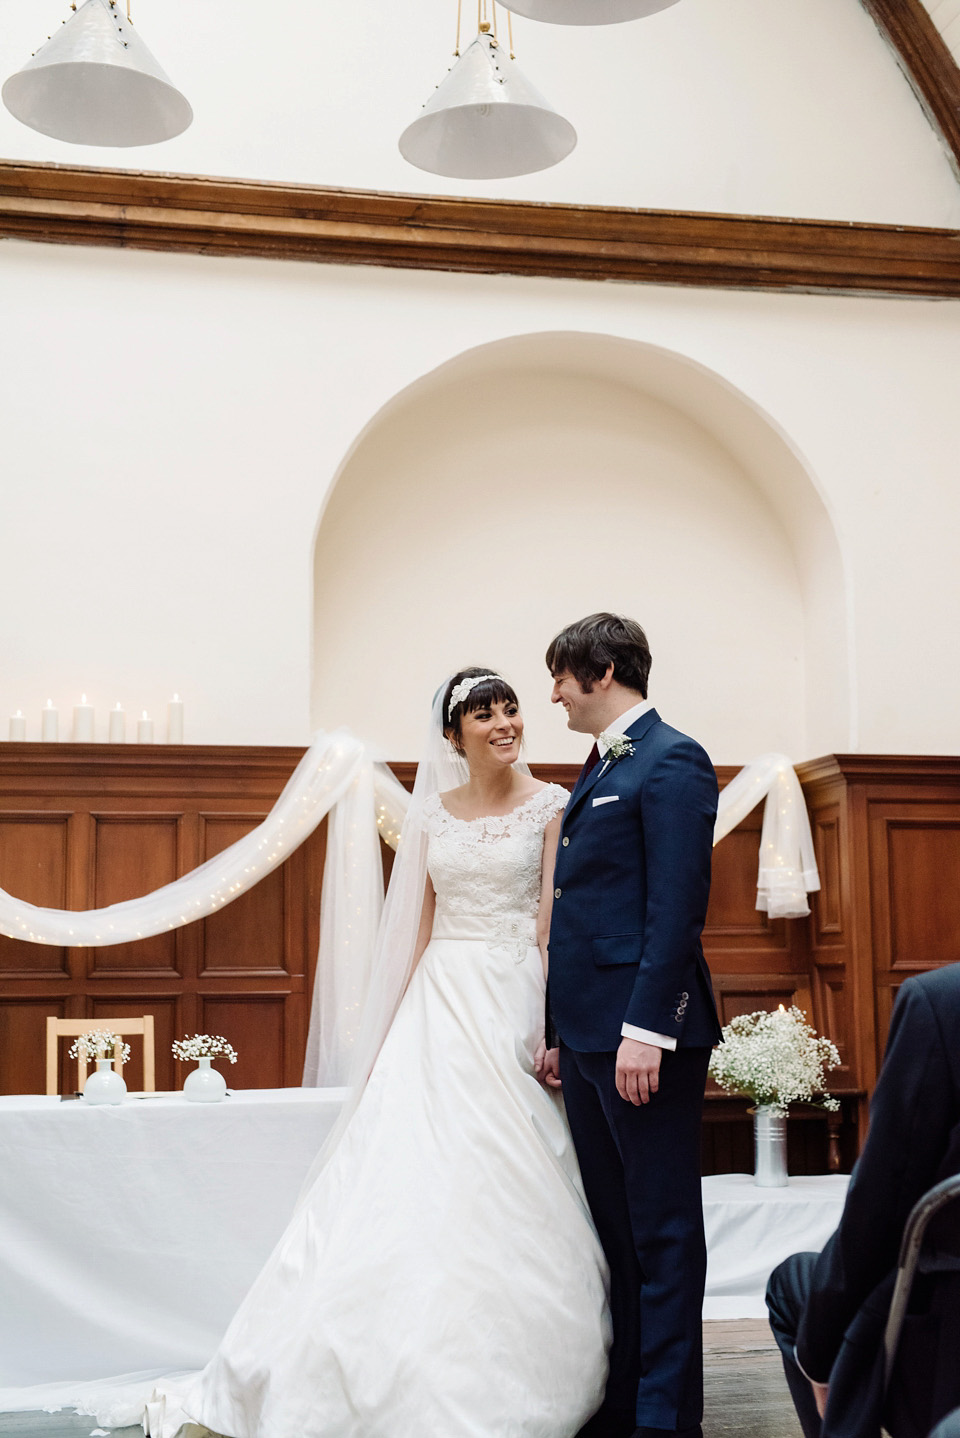 A Beatles and 1960s inspired wedding in Glasgow. The bride wears Justin Alexander. Photography by Neil Thomas Douglas.